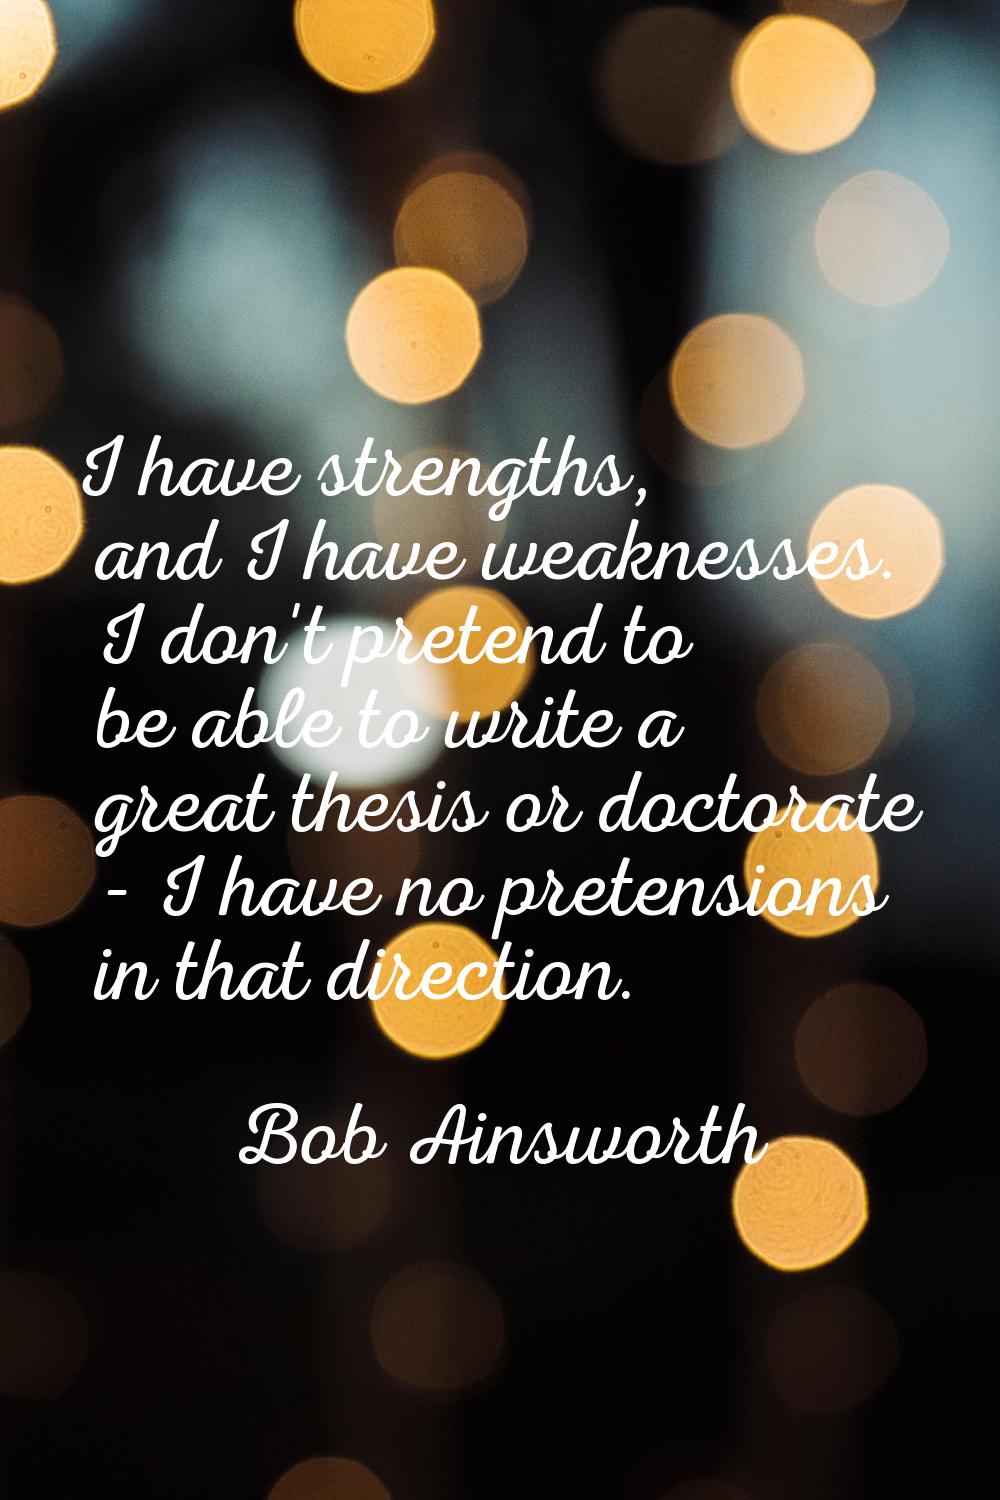 I have strengths, and I have weaknesses. I don't pretend to be able to write a great thesis or doct